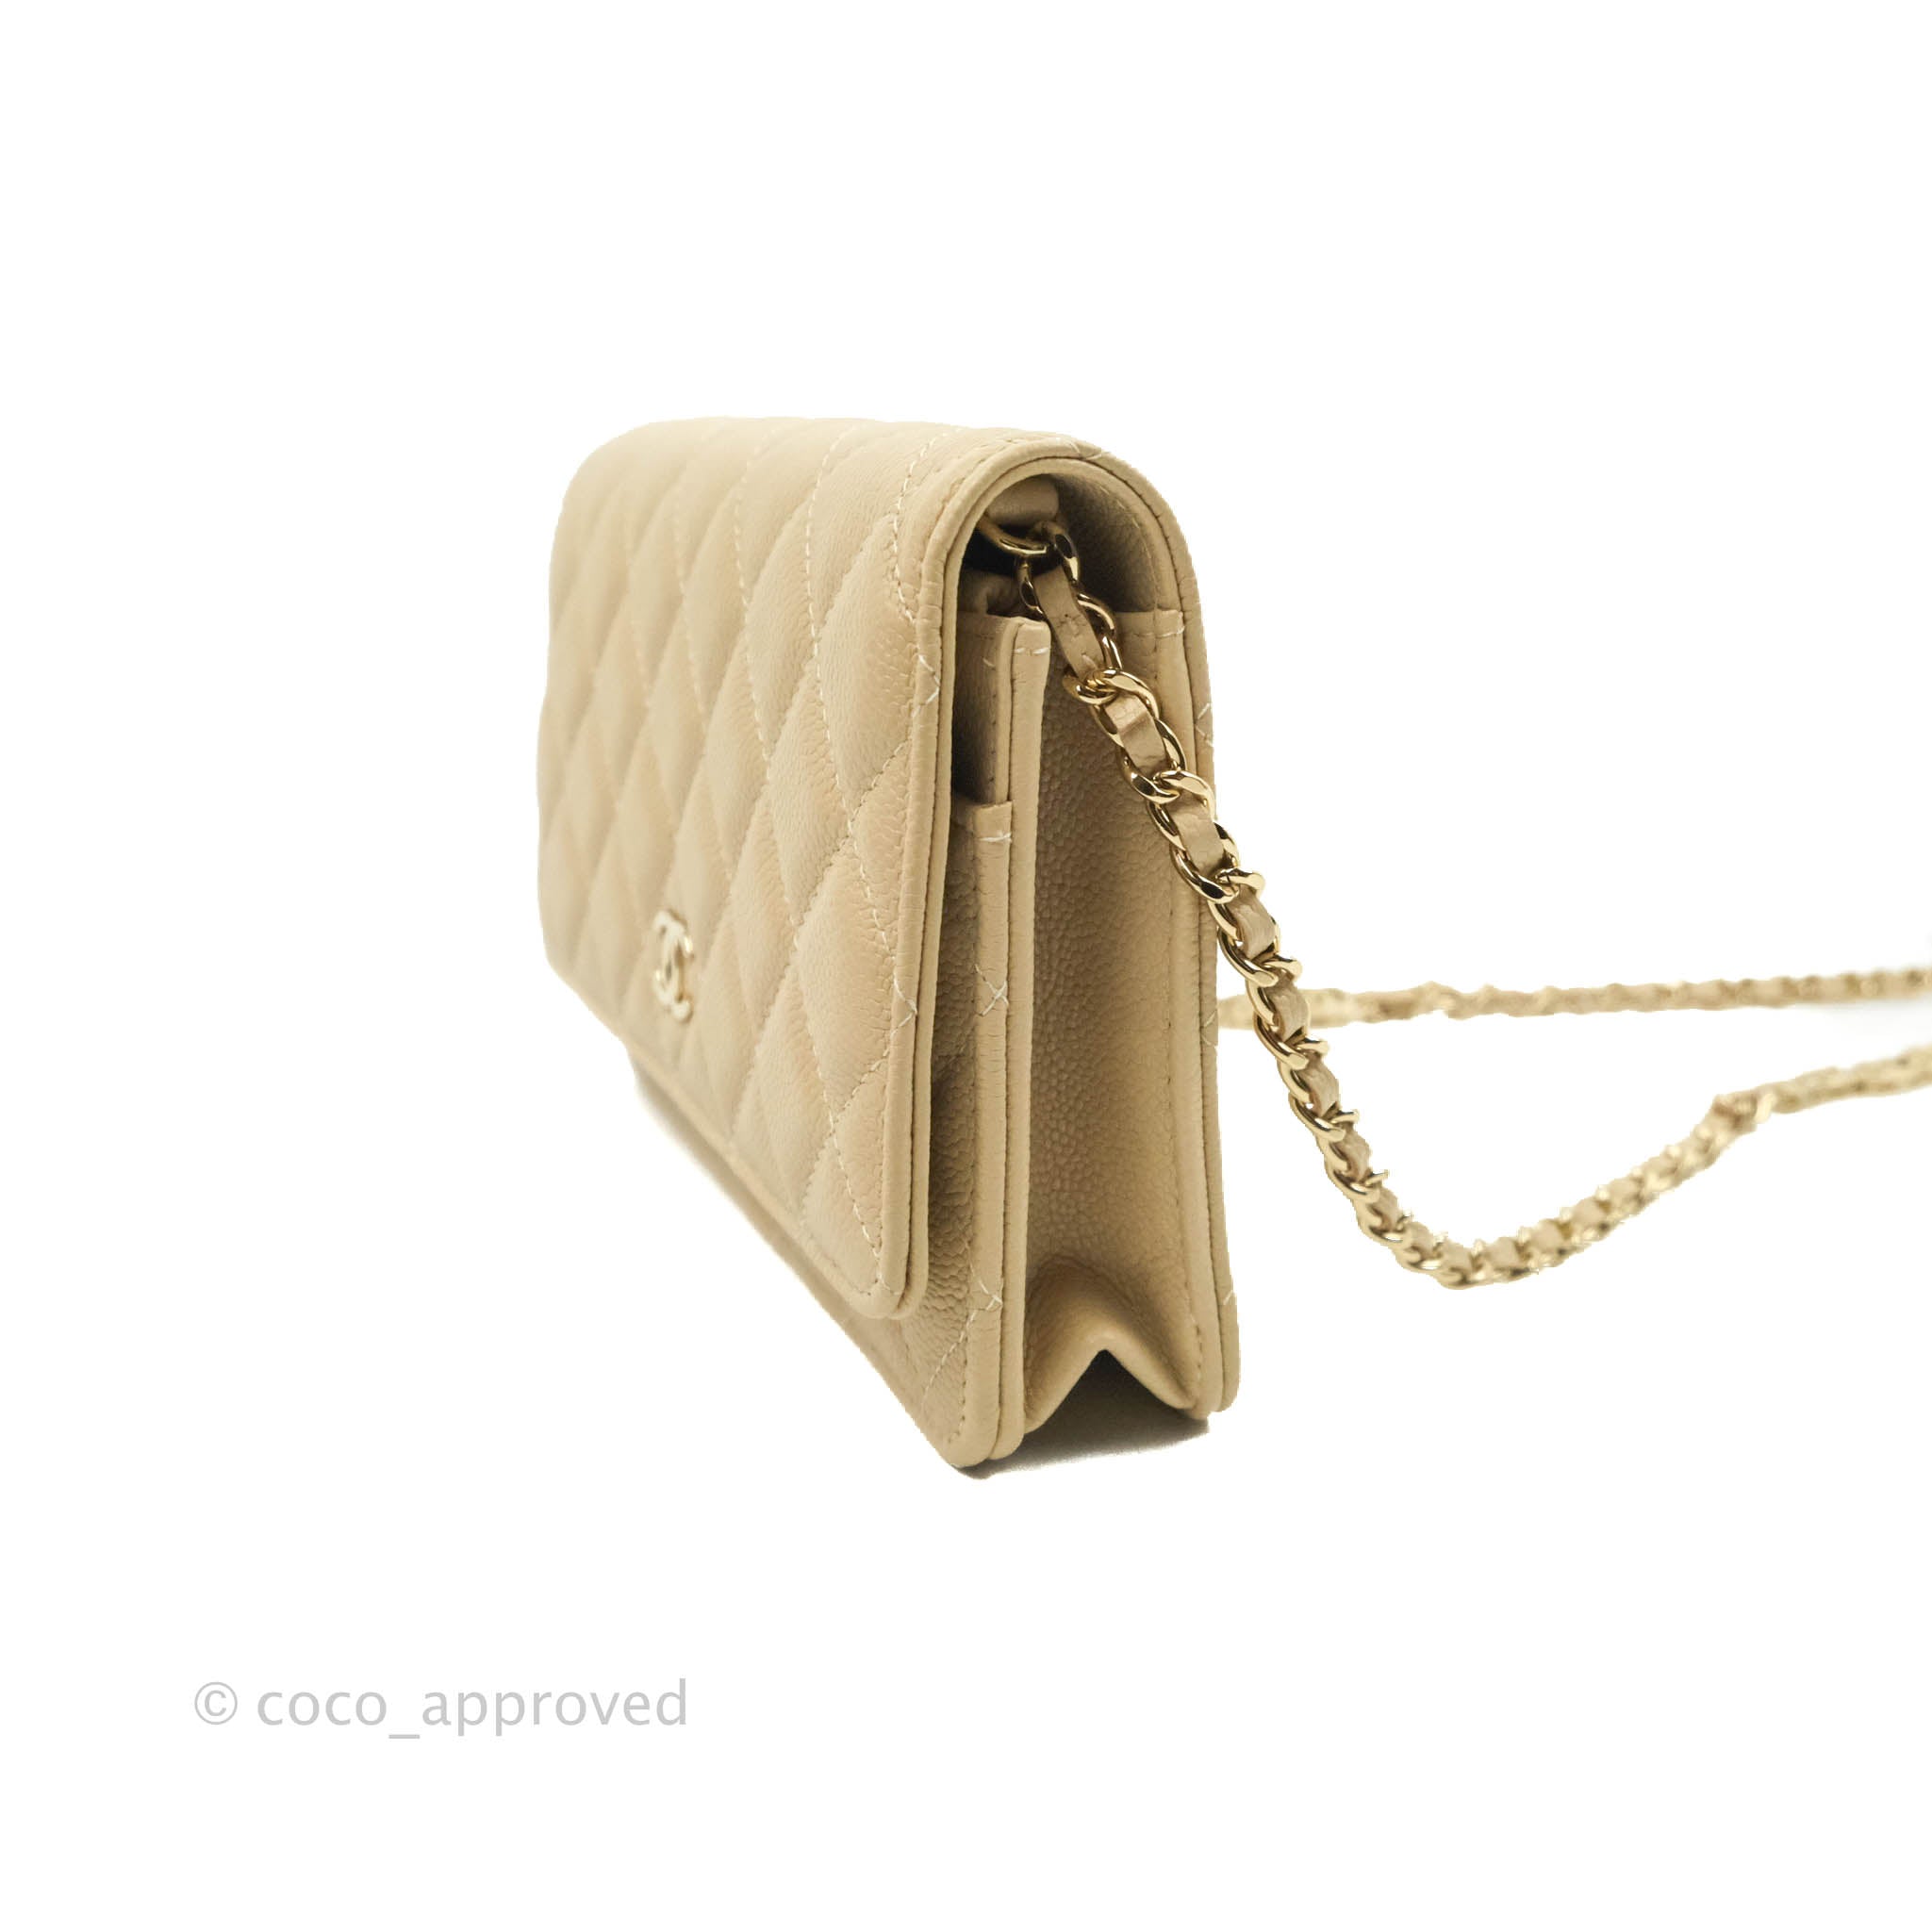 Chanel Classic Quilted Wallet on Chain Dark Nude Beige Caviar –  ＬＯＶＥＬＯＴＳＬＵＸＵＲＹ